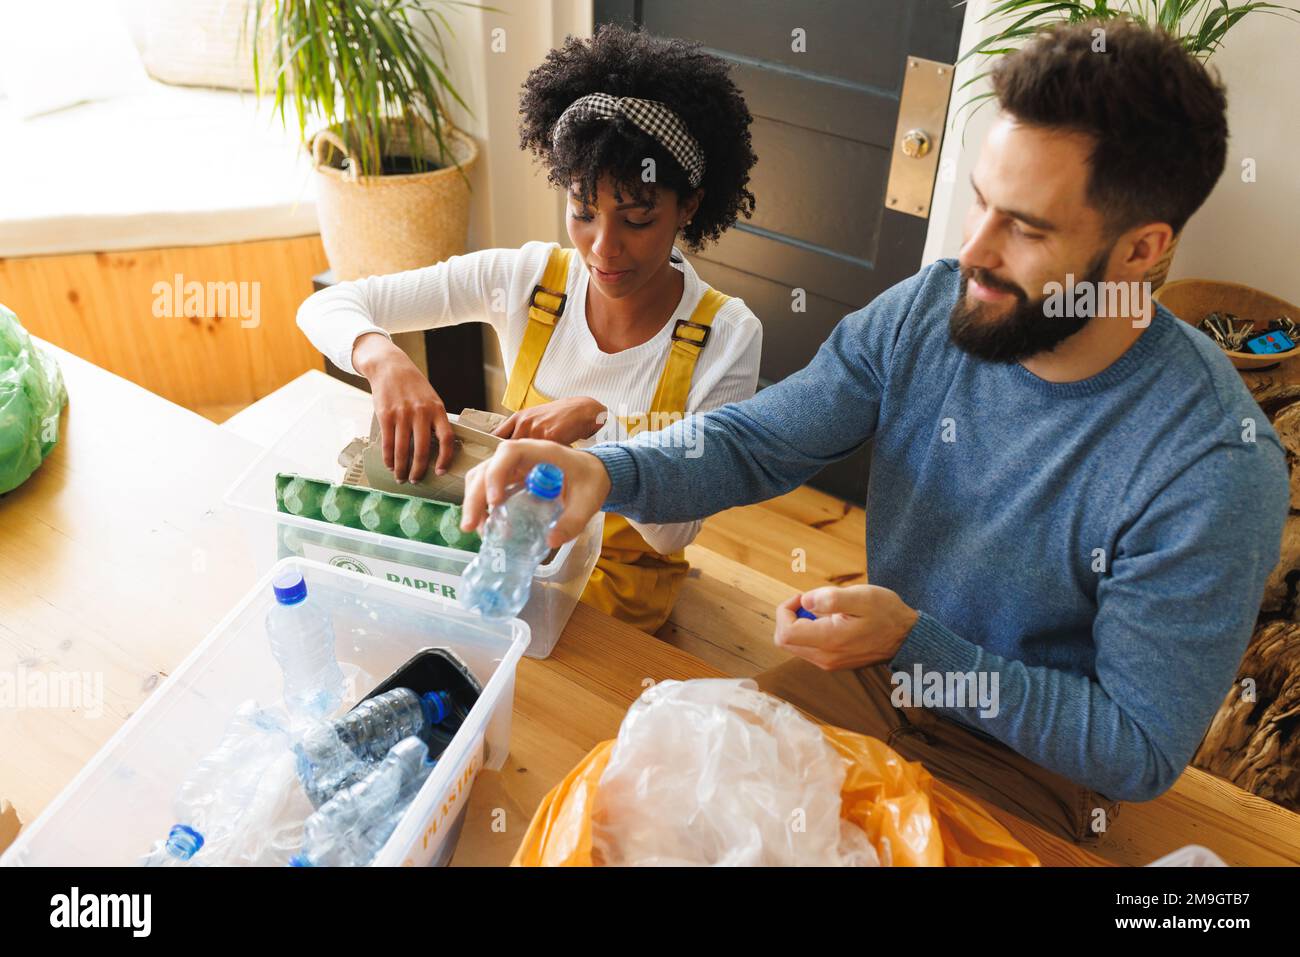 High angle view of biracial young couple sorting papers and plastics garbage in bins on table Stock Photo